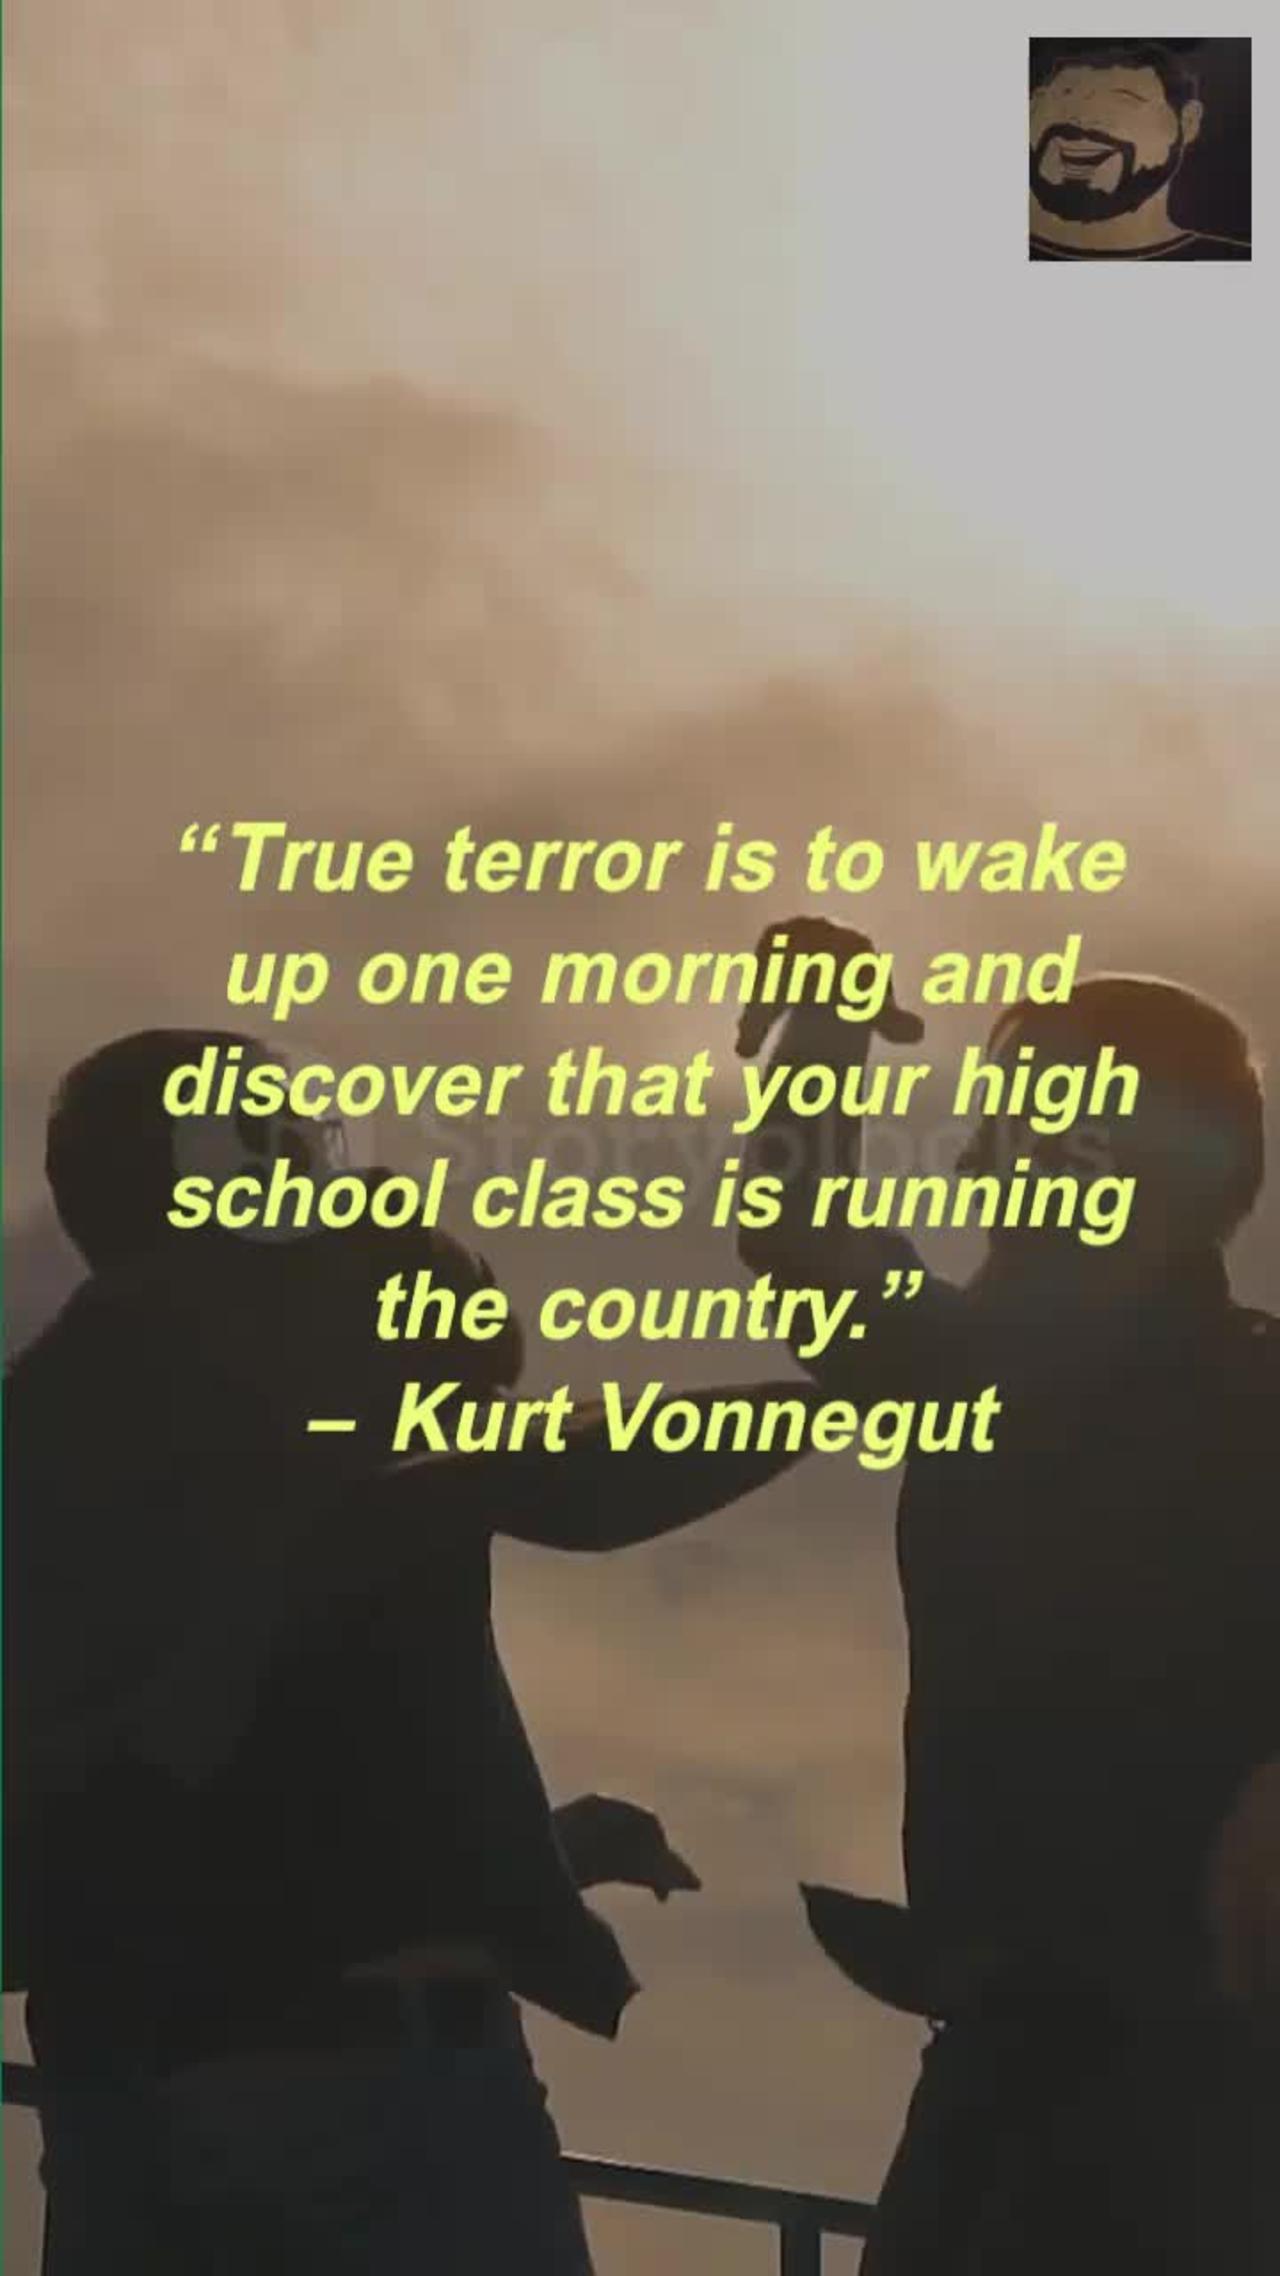 “True terror is to wake up one morning and discover that your high school class